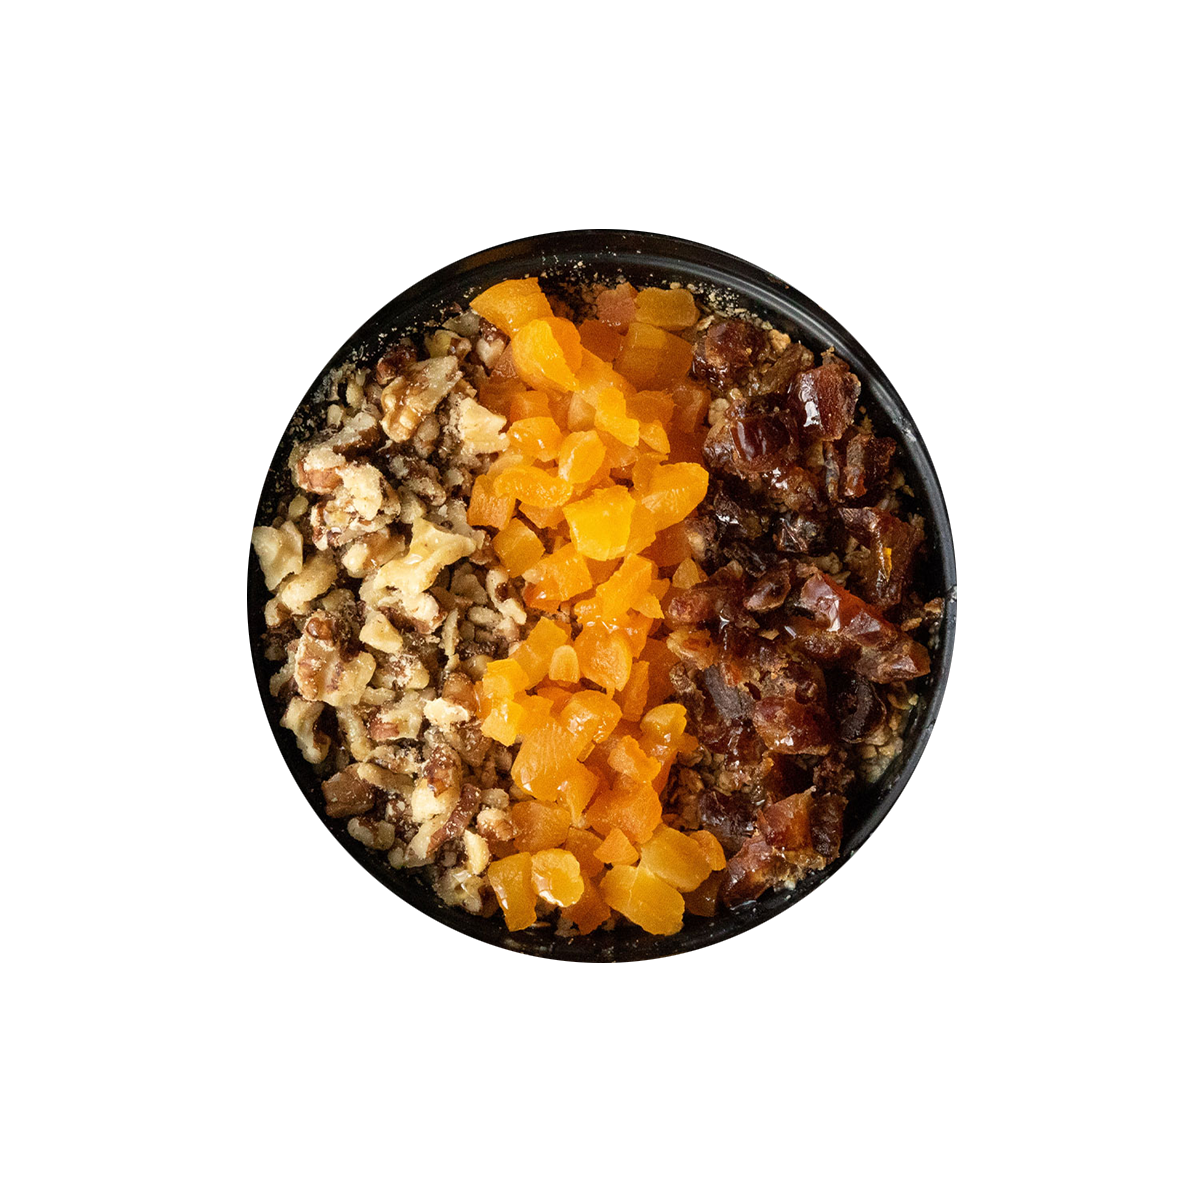 Turkish Delight Dried Fruit Oatmeal Bowl Williamsburg Norfolk Virginia Beach Town Center Cold Pressed